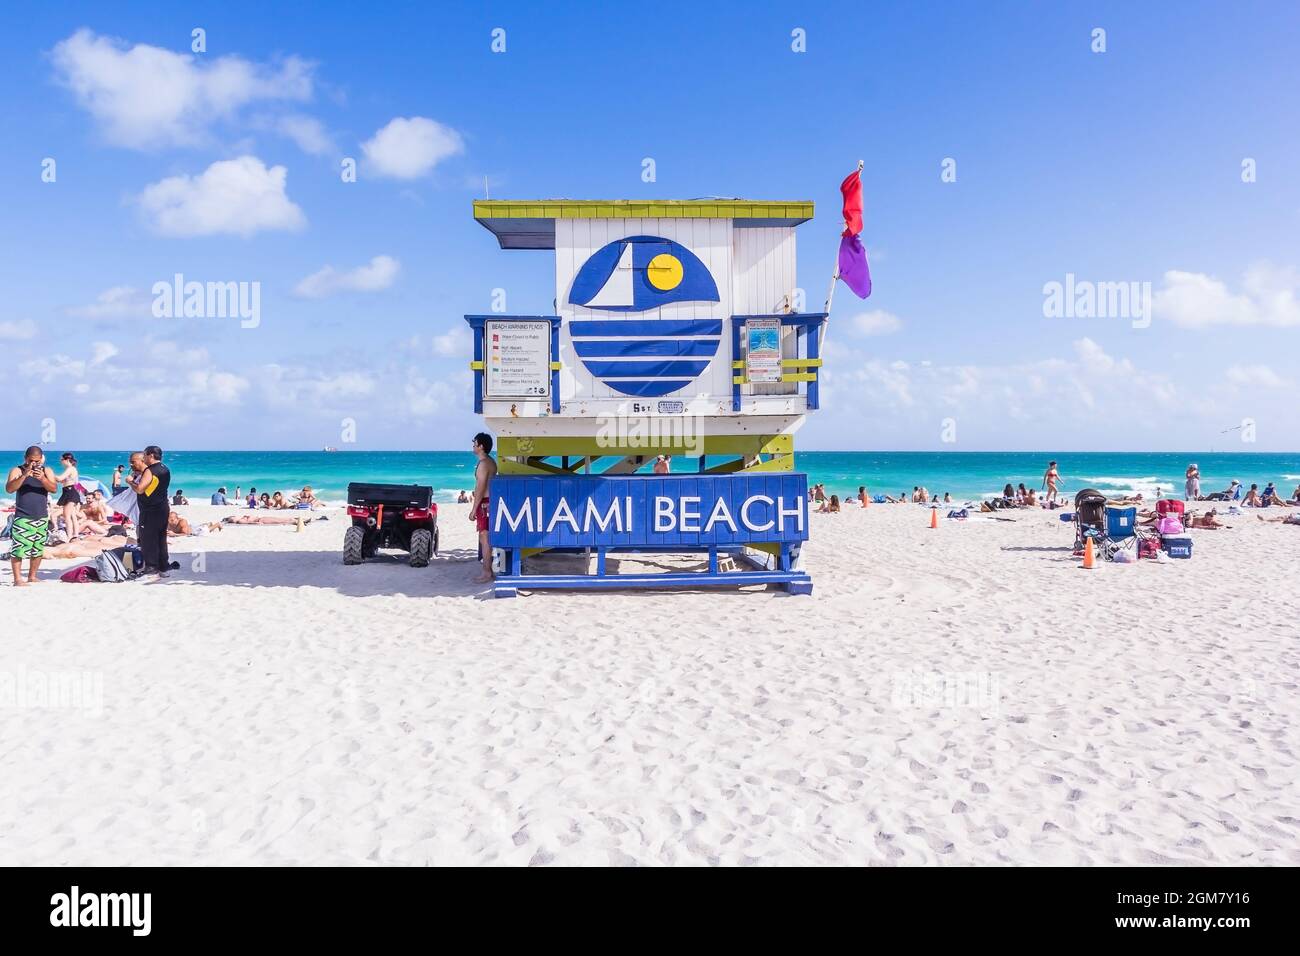 MIAMI, USA - JANUARY 01, 2017: Summer scene with a typical colorful lifeguard house in Miami Beach, Florida with blue sky and ocean in the background Stock Photo